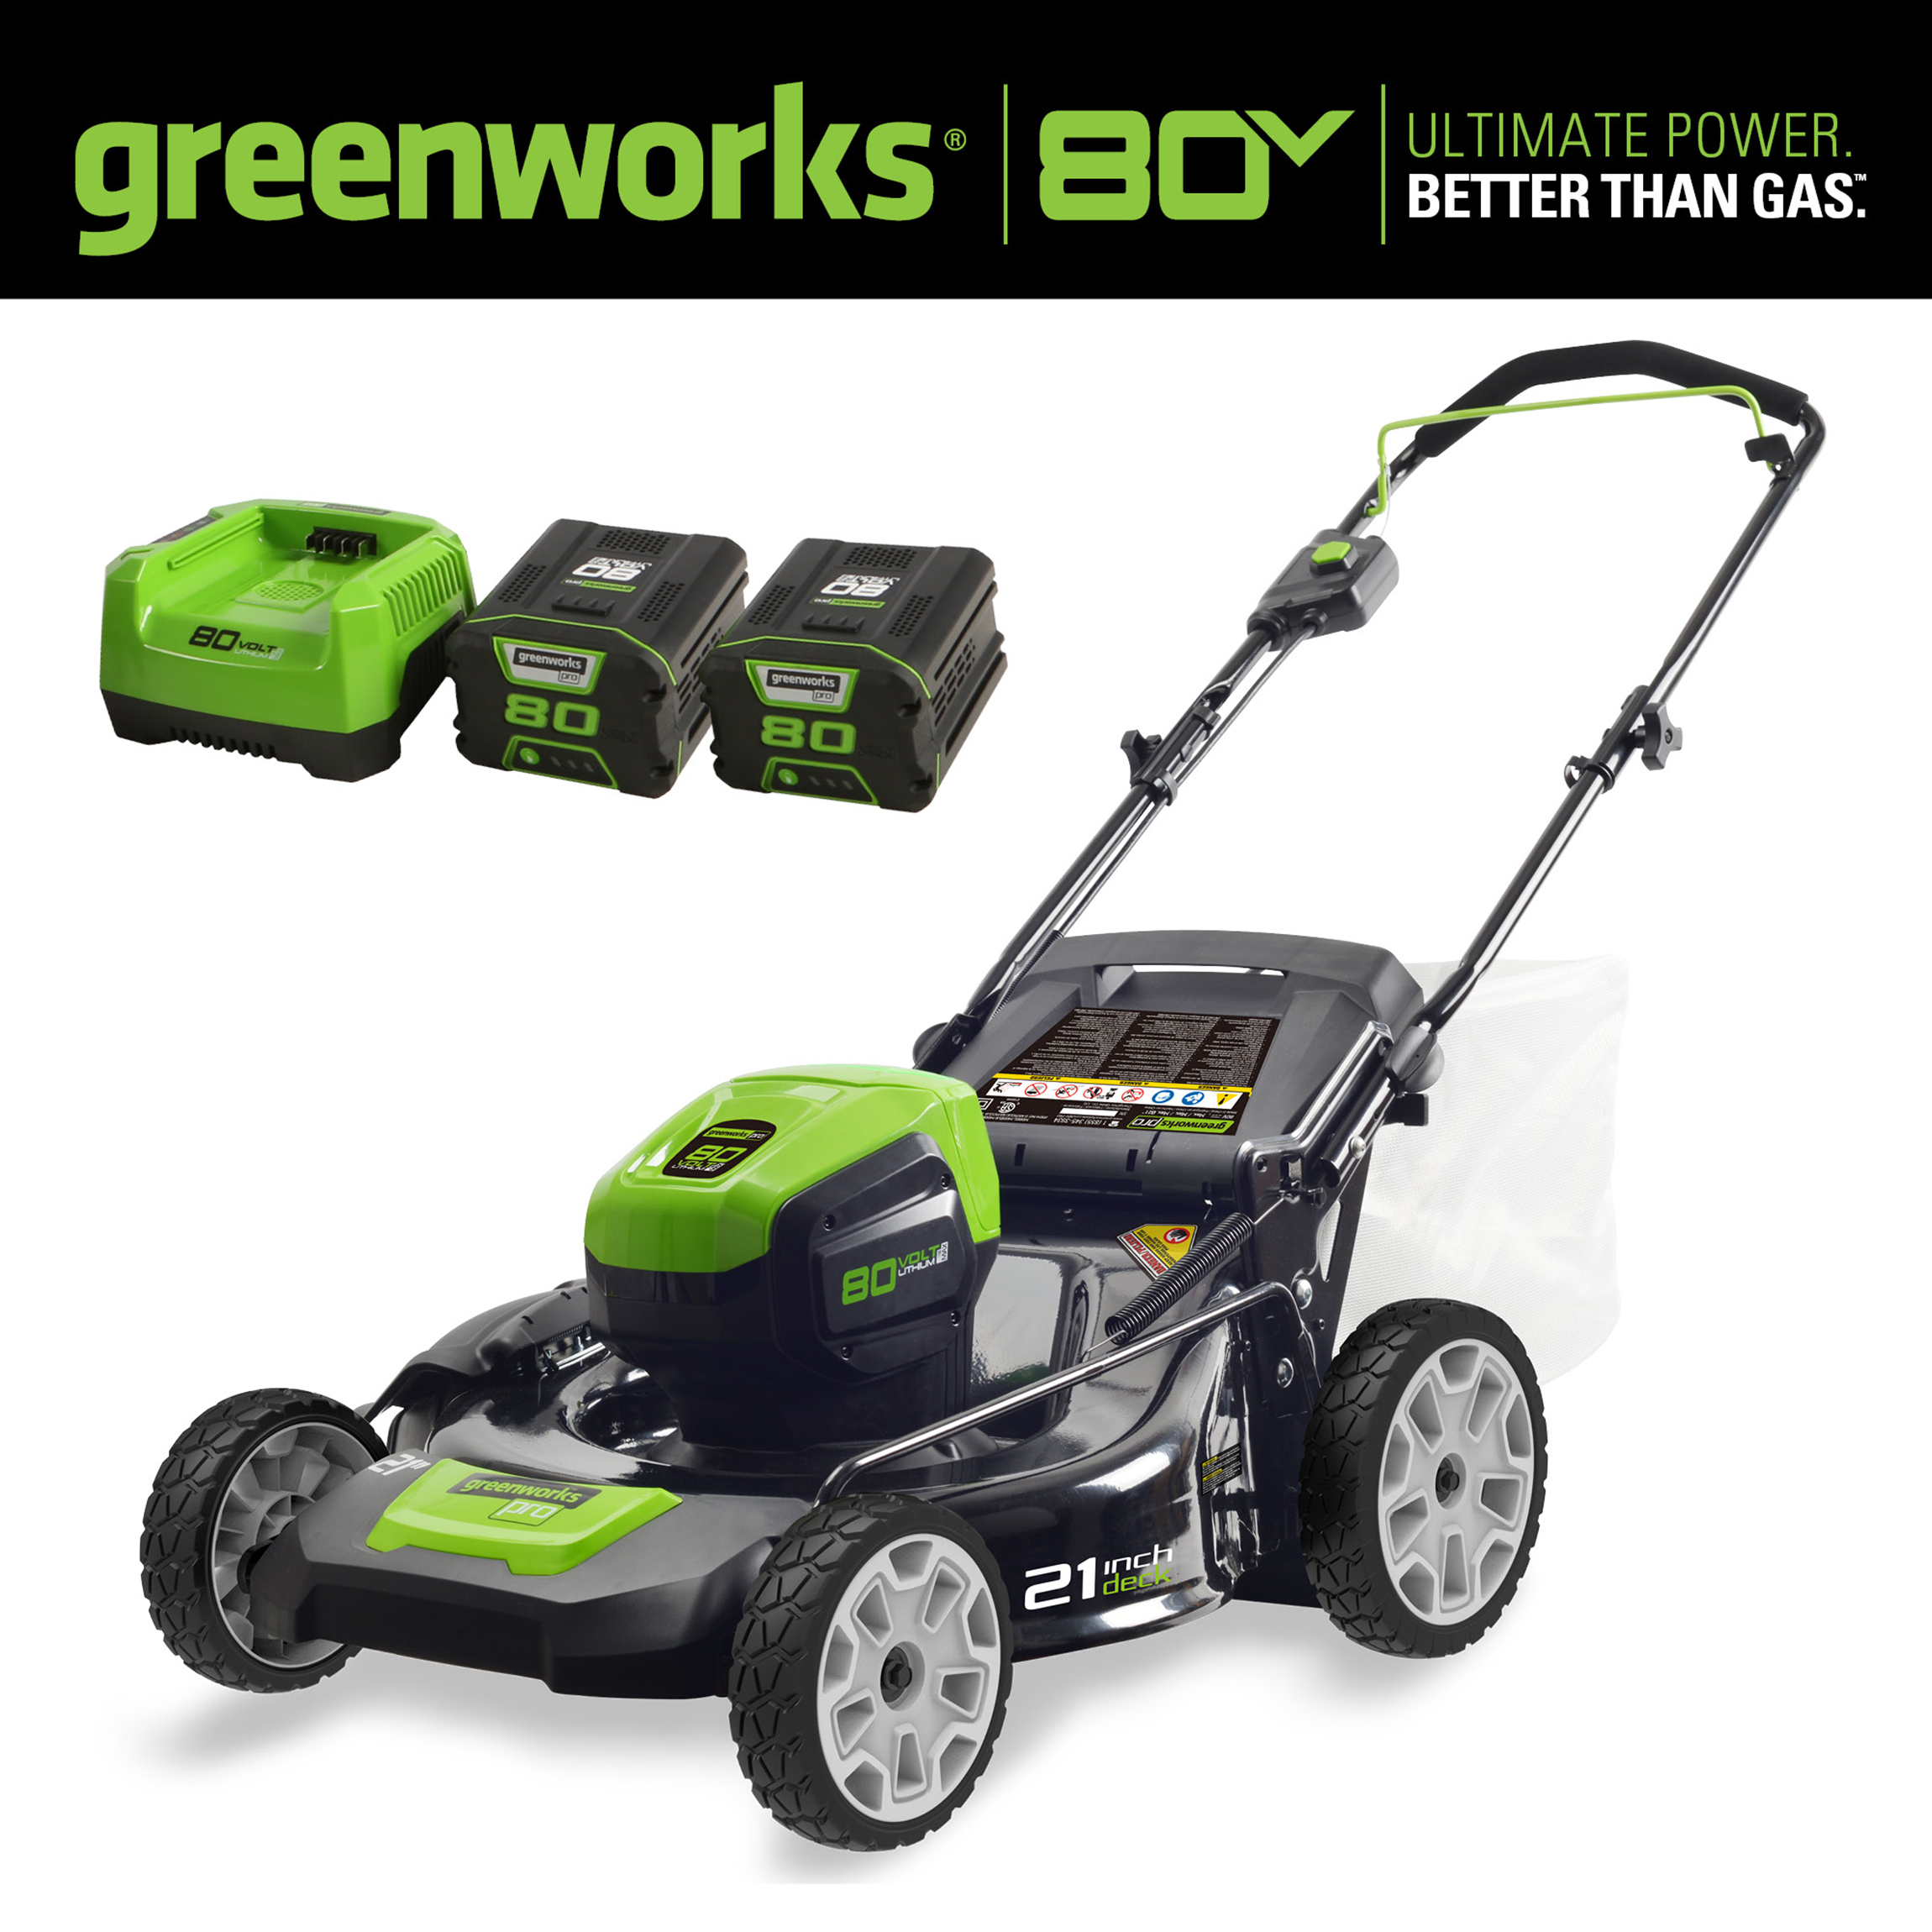 Greenworks 80V 21" Battery Powered Push Mower + (2) 2.0Ah Batteries & Rapid Charger - image 4 of 16